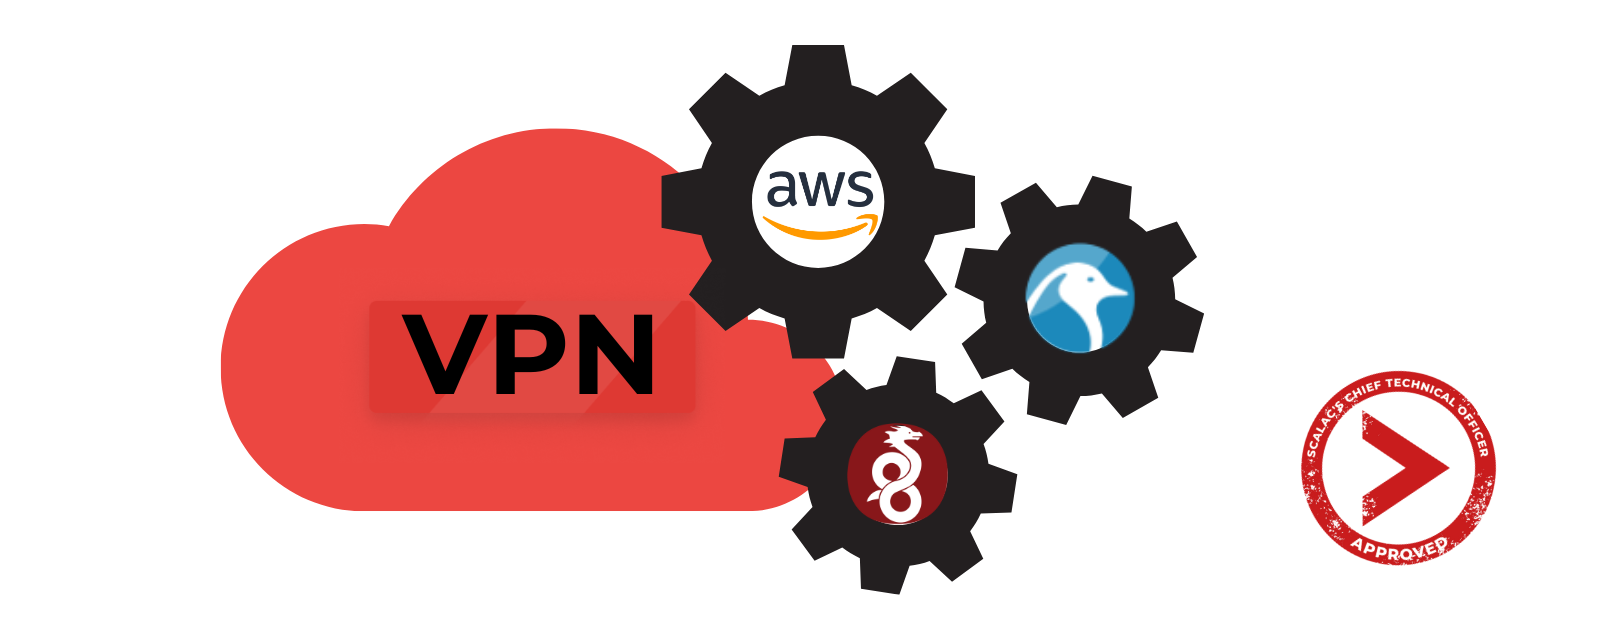 Implementing cloud VPN solution using AWS, Linux and WireGuard